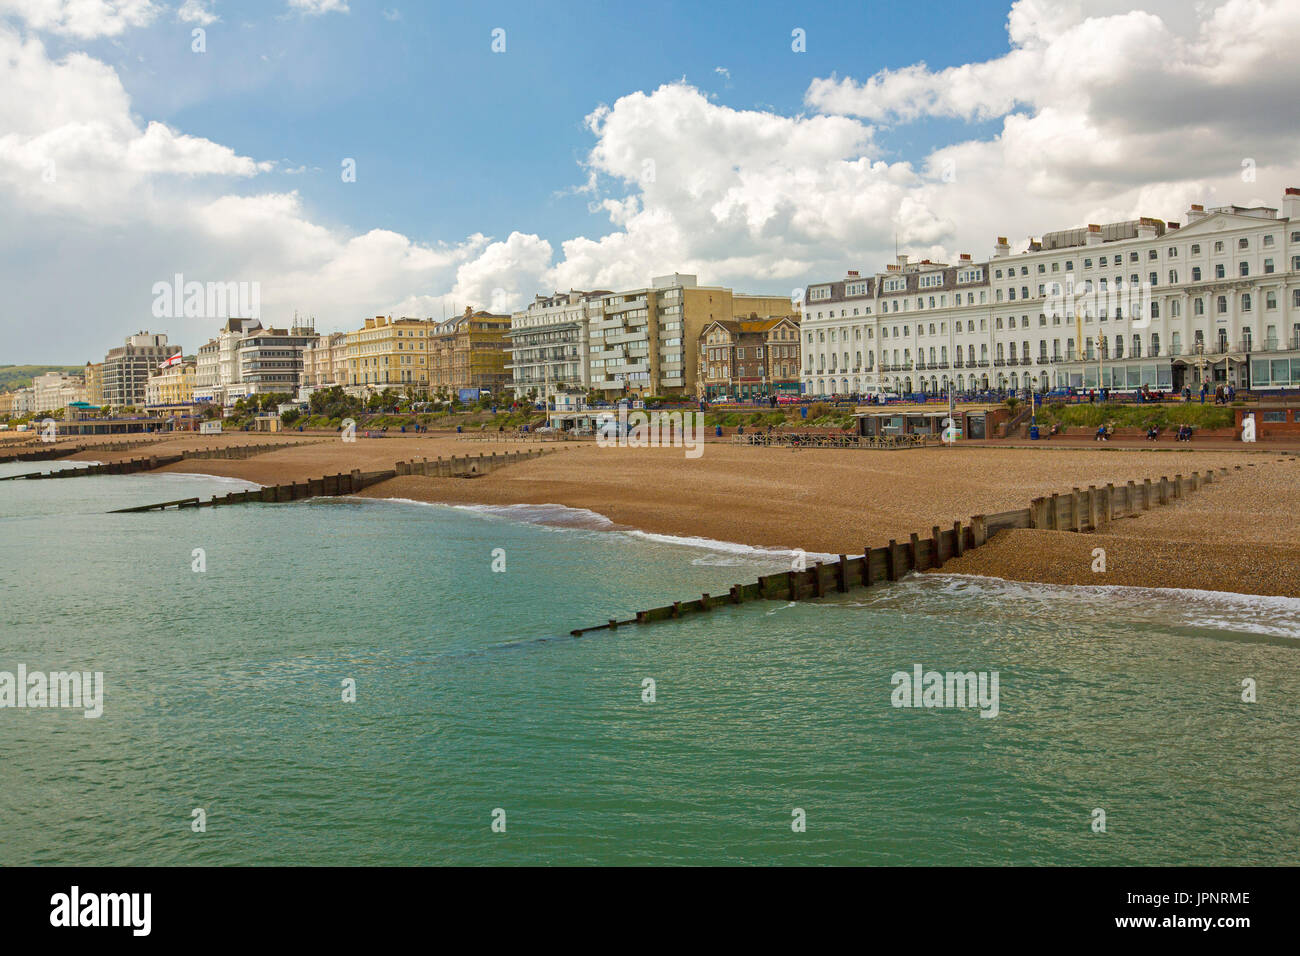 Deserted beach, turquoise water of ocean, and row of waterfront hotels and guesthouses at English holiday destination of Eastbourne Stock Photo